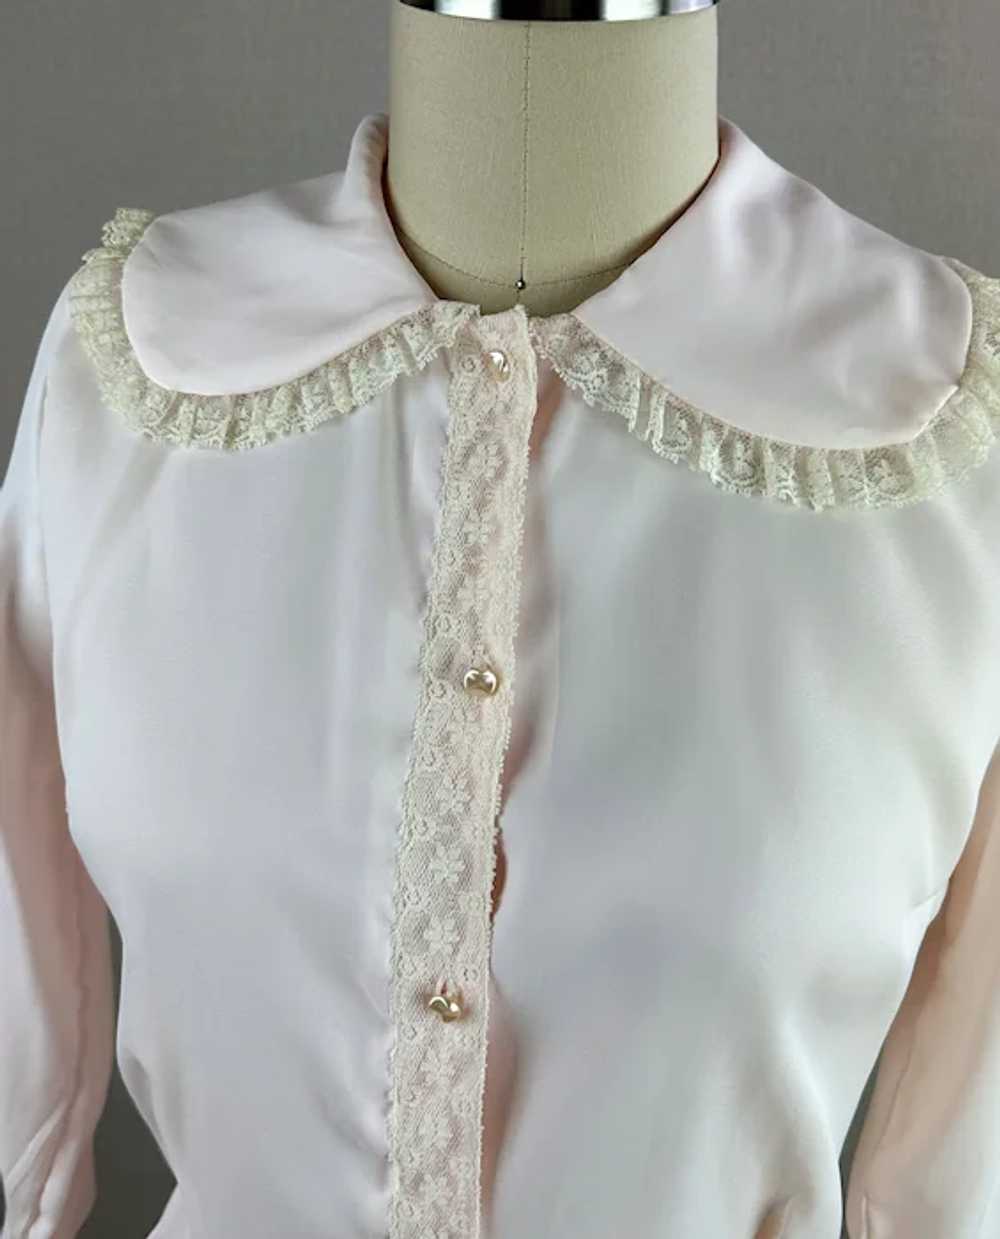 50s Pink Nylon Lace Blouse w/ Elbow Sleeves, B36 - image 3